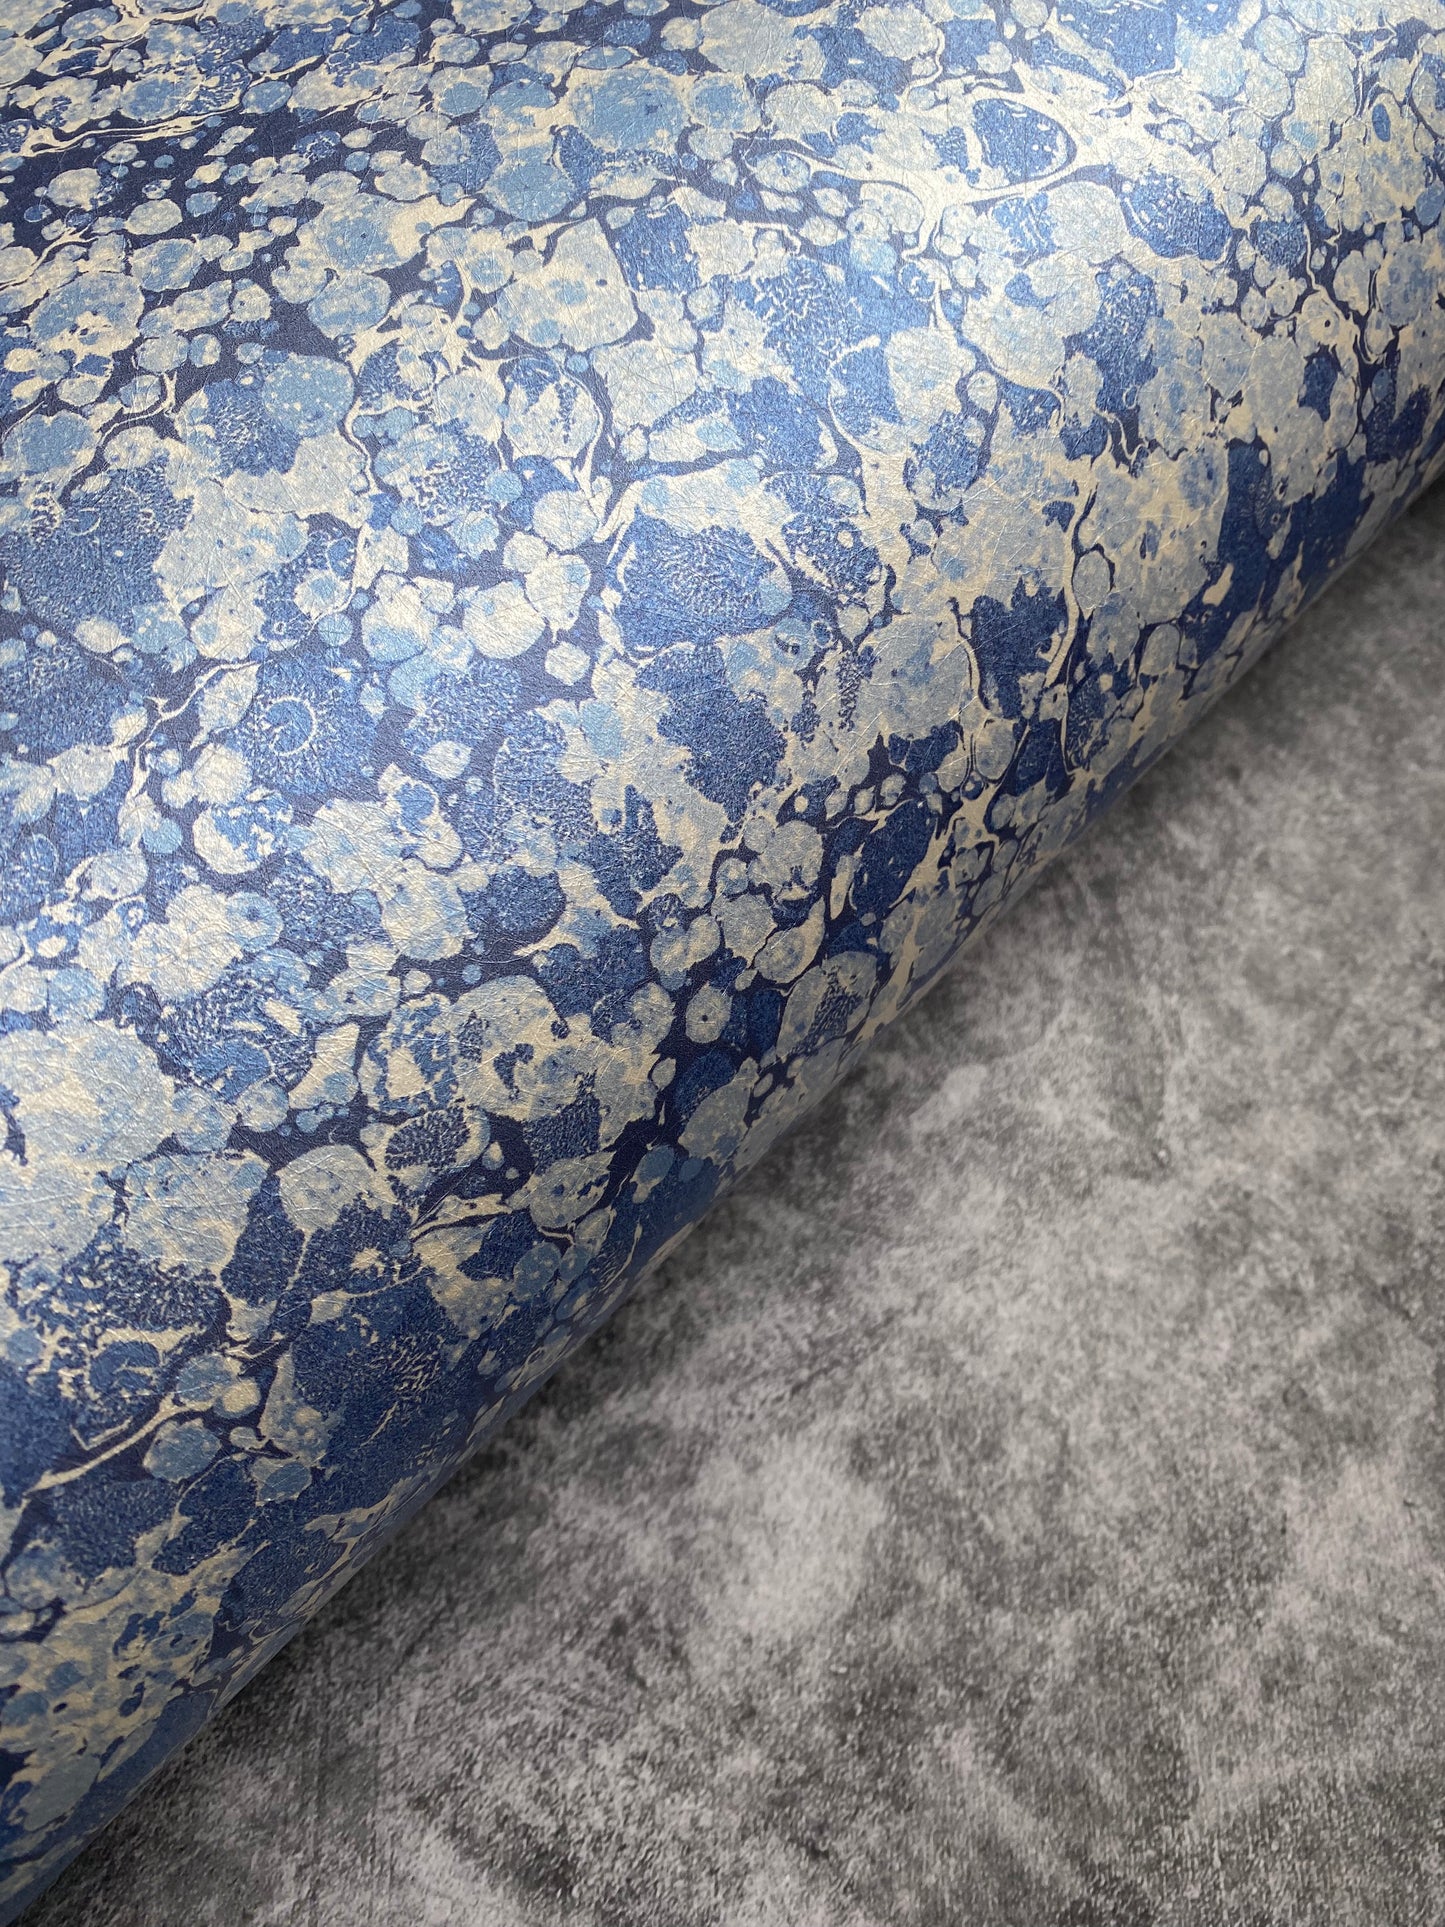 Printed Wallpaper - 'Ditzy' Col: Blue Daze - Mica Coated Non-Woven